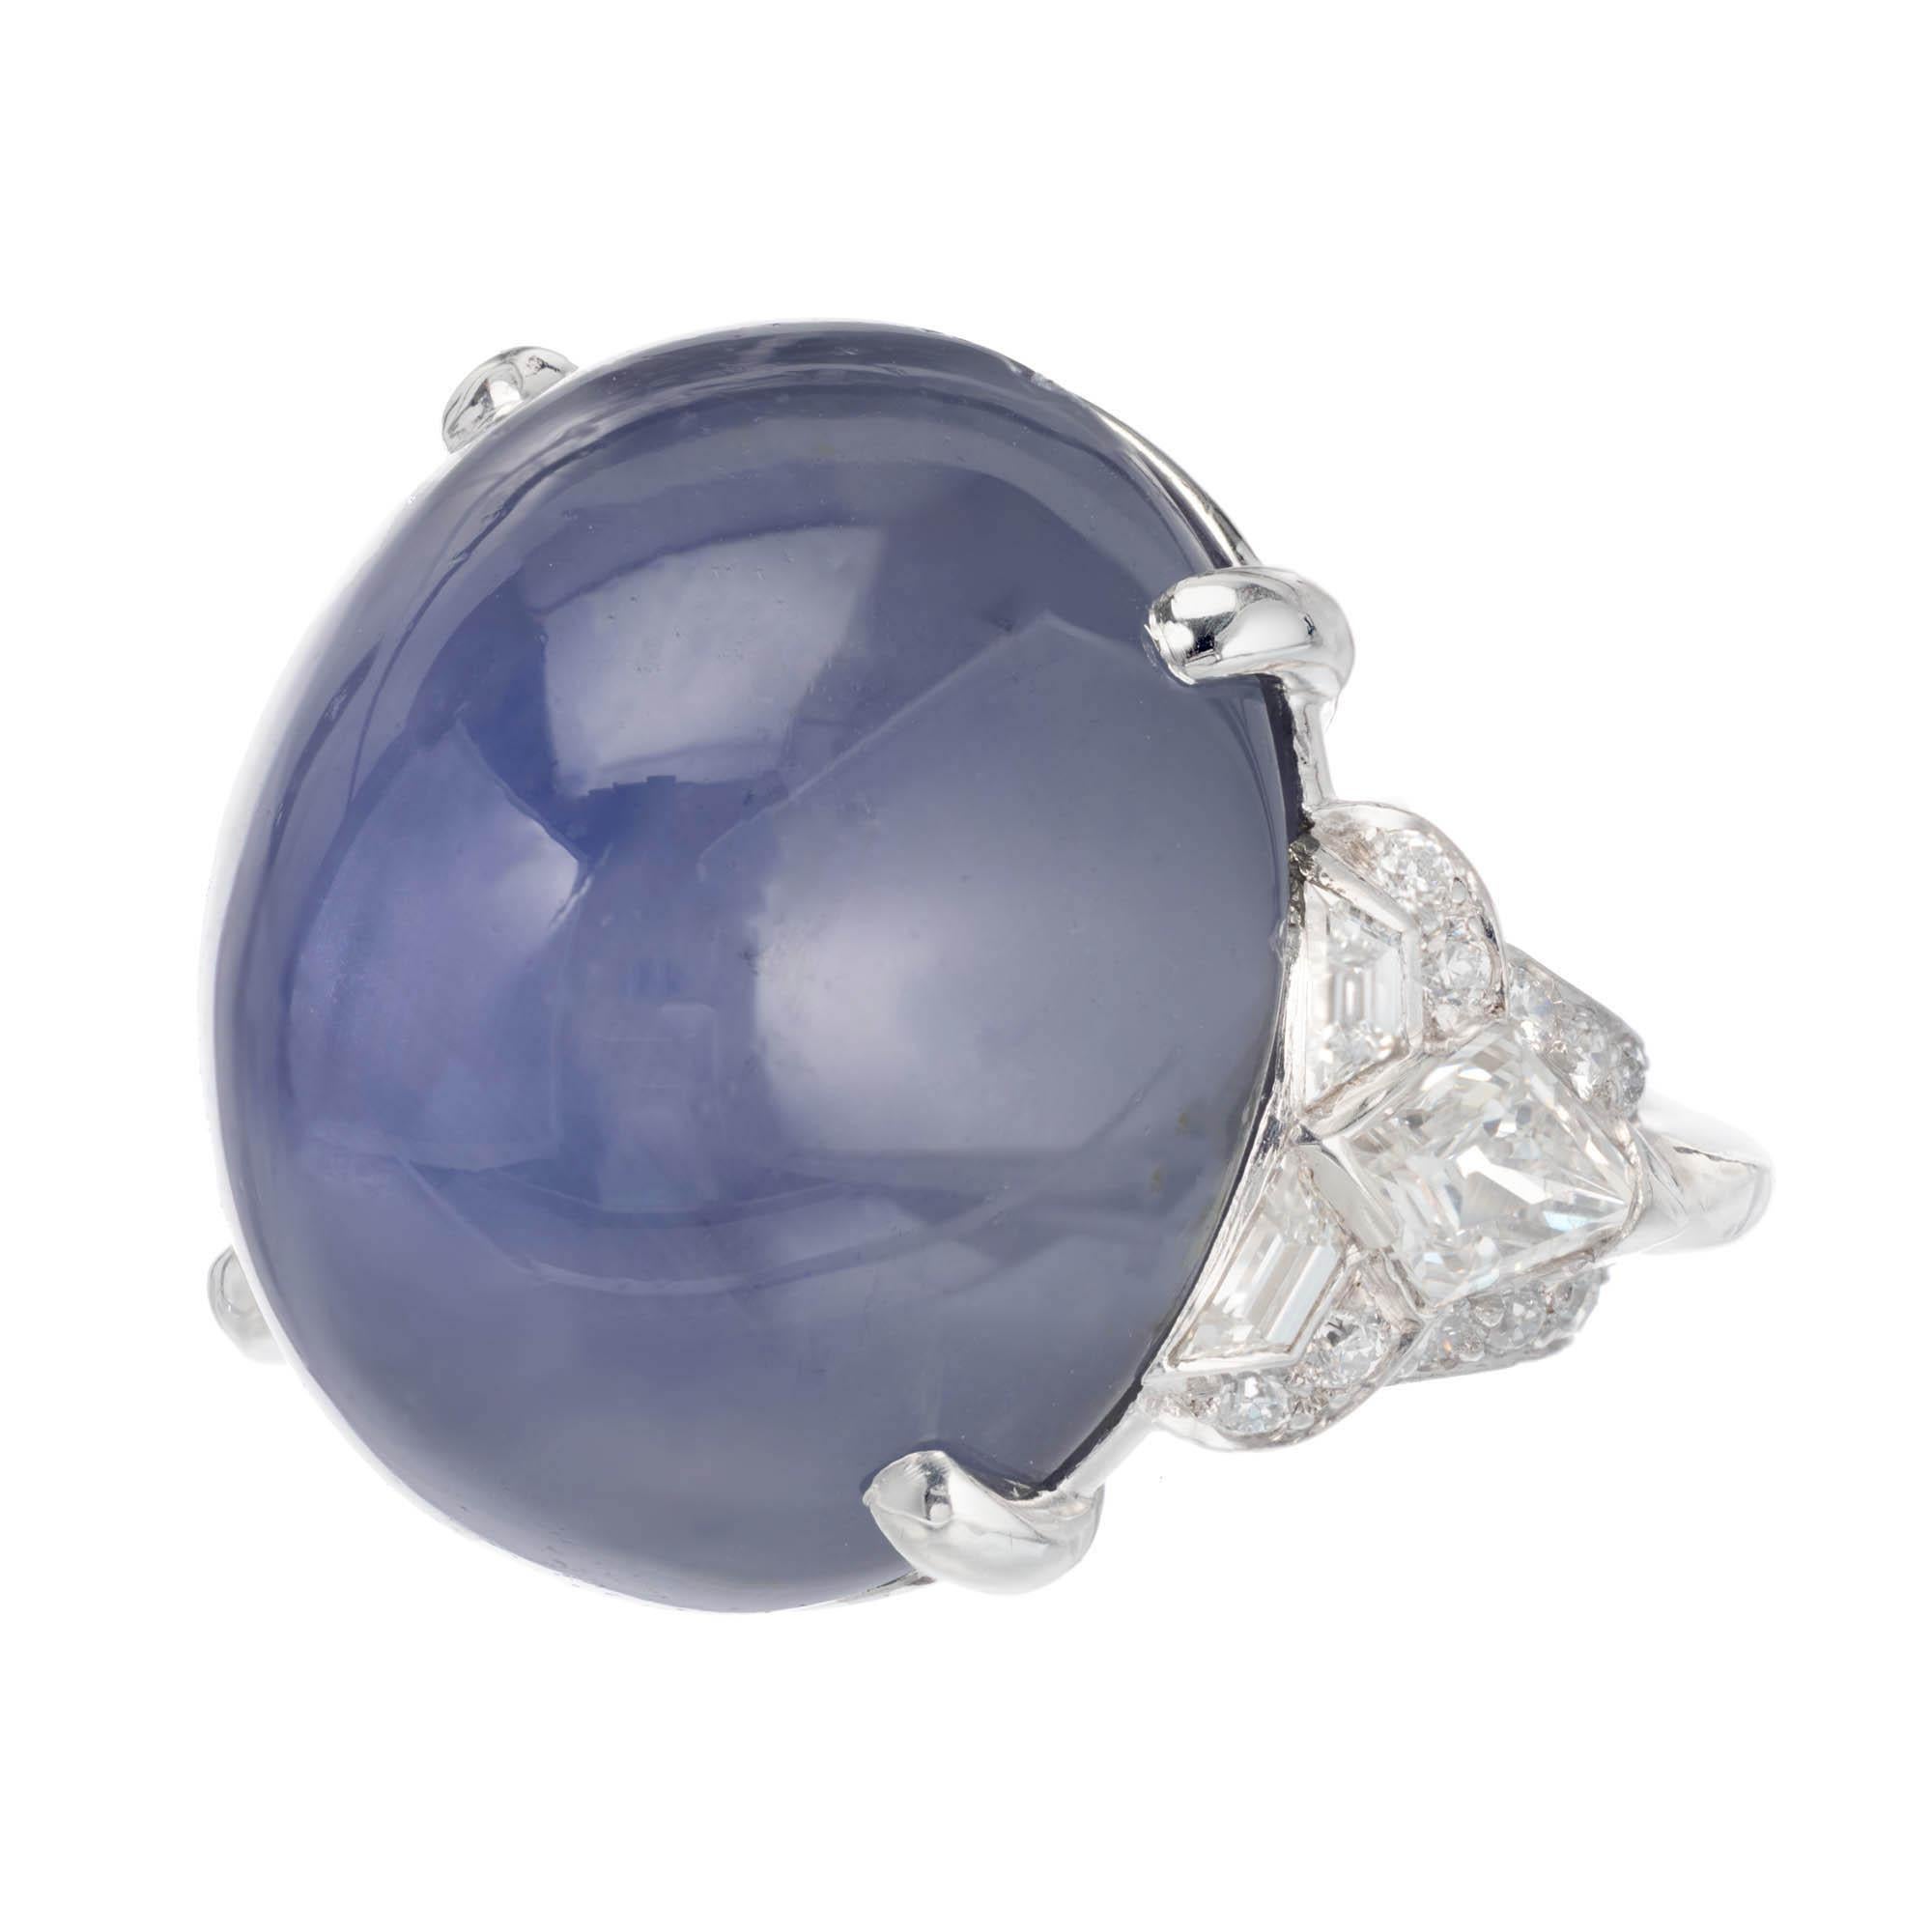 Vintage 1920's translucent 45.18 carat star sapphire Art Deco cocktail ring. Platinum setting accented with trapezoid, kite and round diamonds.  GIA certified no heat, no enhancements.

1 oval double cabochon blue star sapphire, Approximate 45.18